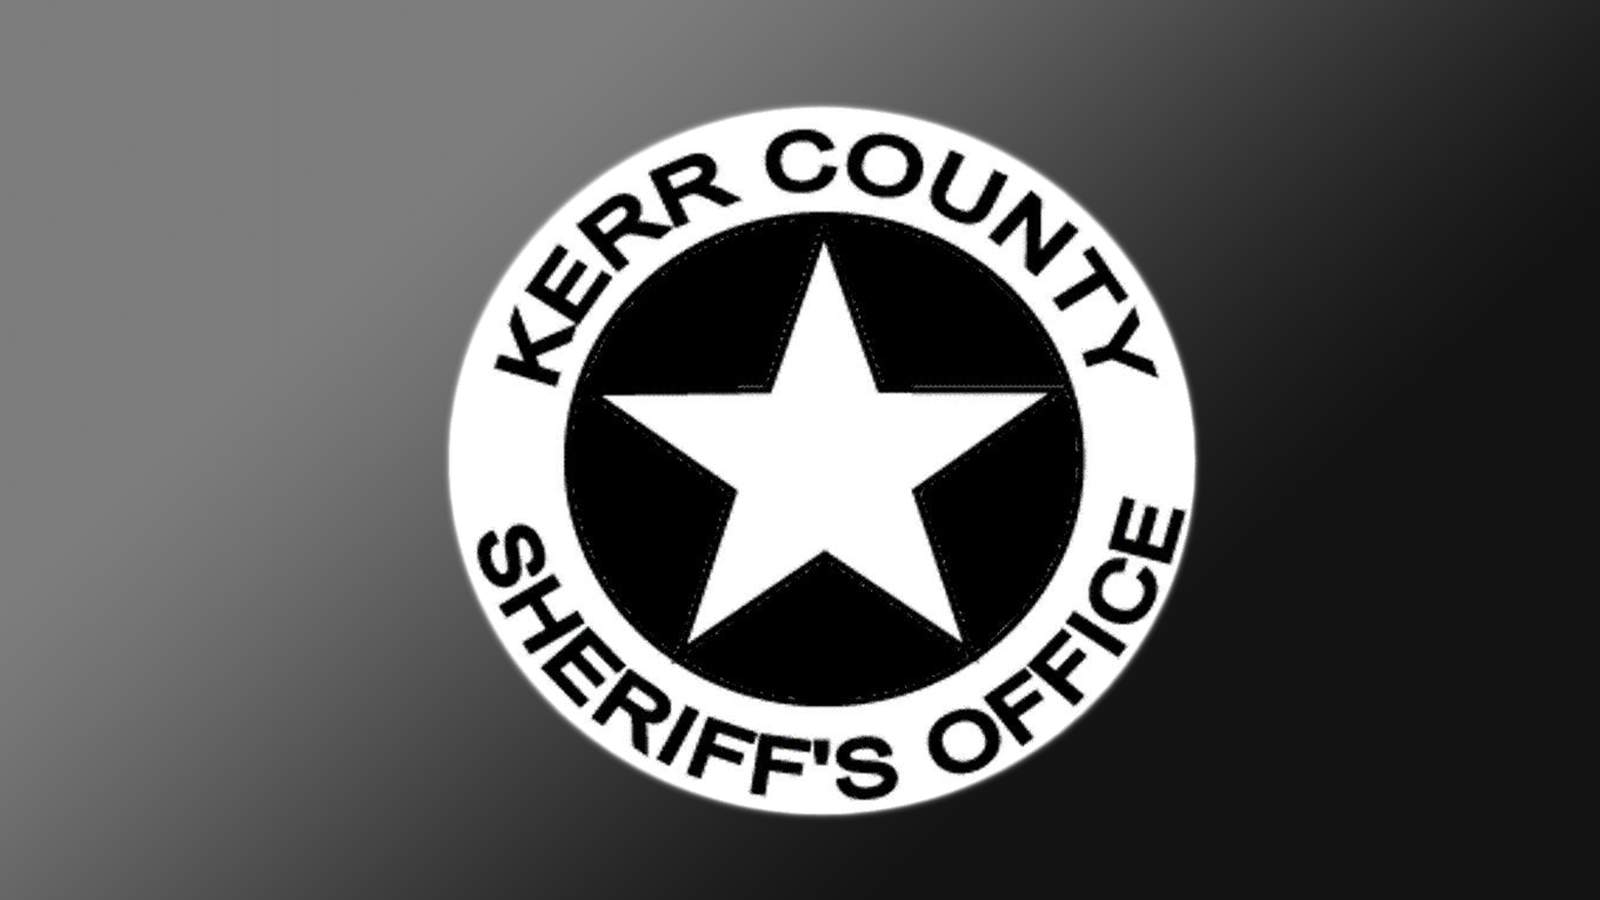 Kerr County corrections officer dies following flu-related complications, sheriff says